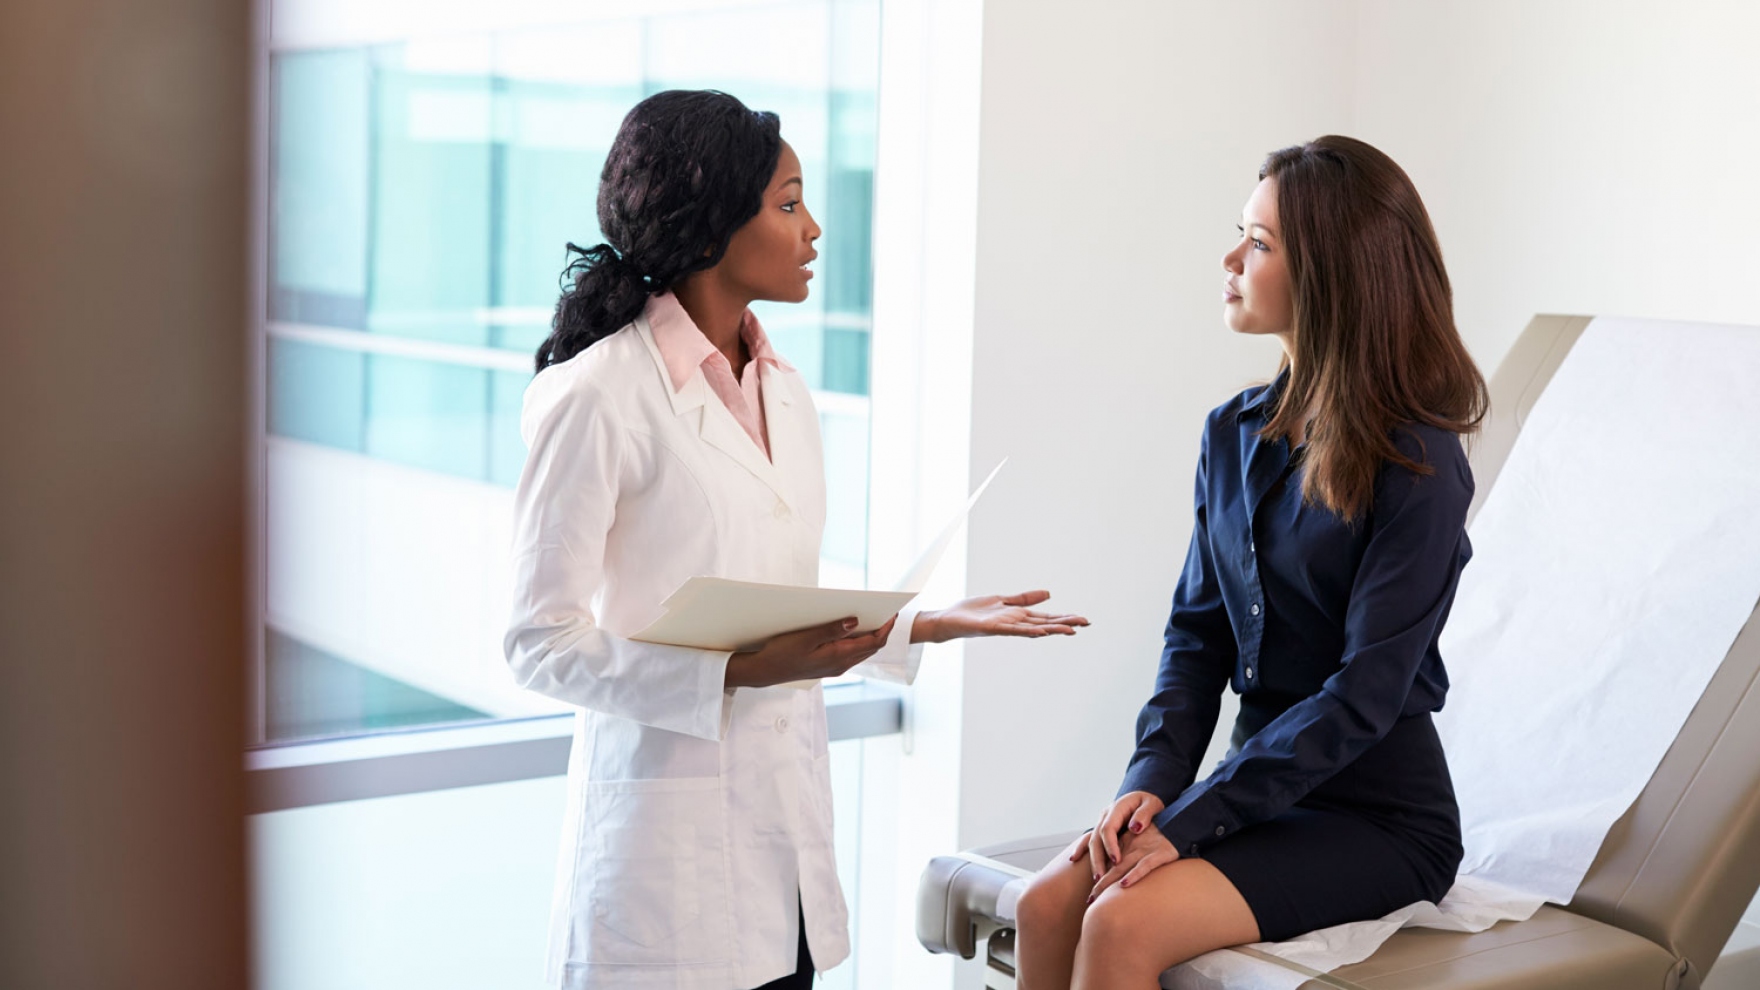 When Women Are Fully Informed about Pelvic Exams, Desire for the Exam